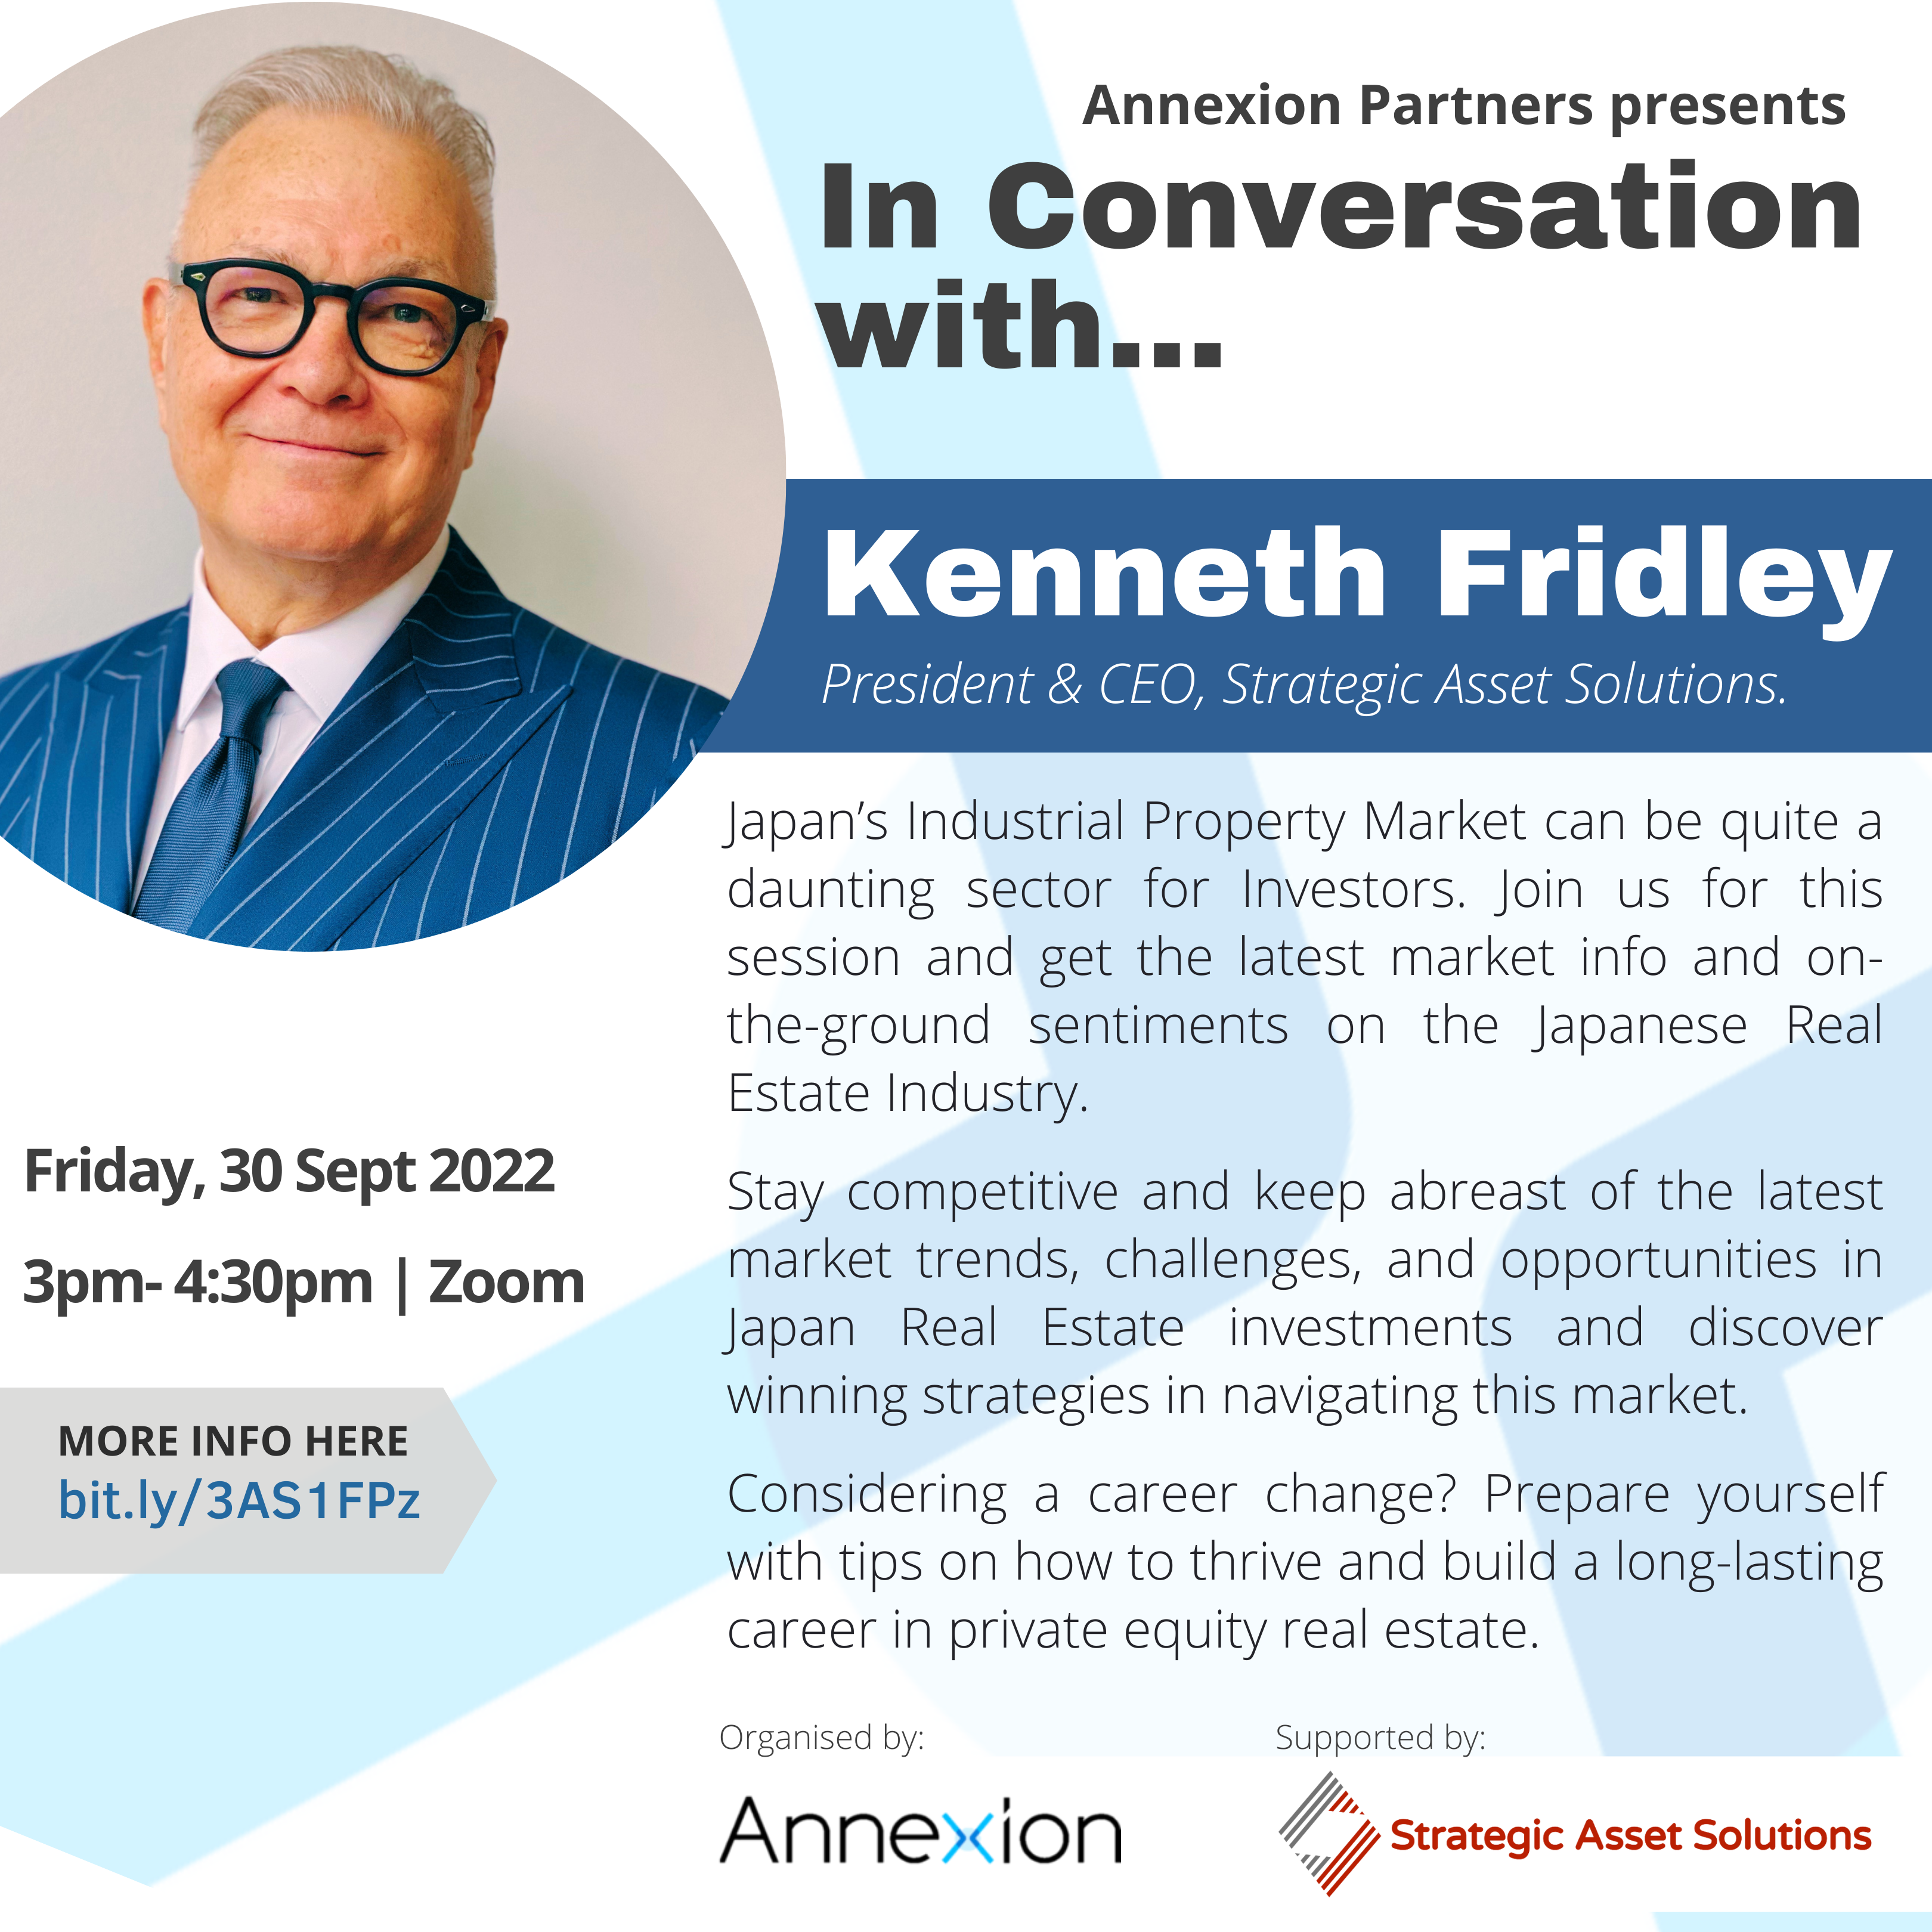 Marketing Collateral for the Networking Session with Kenneth Fridley